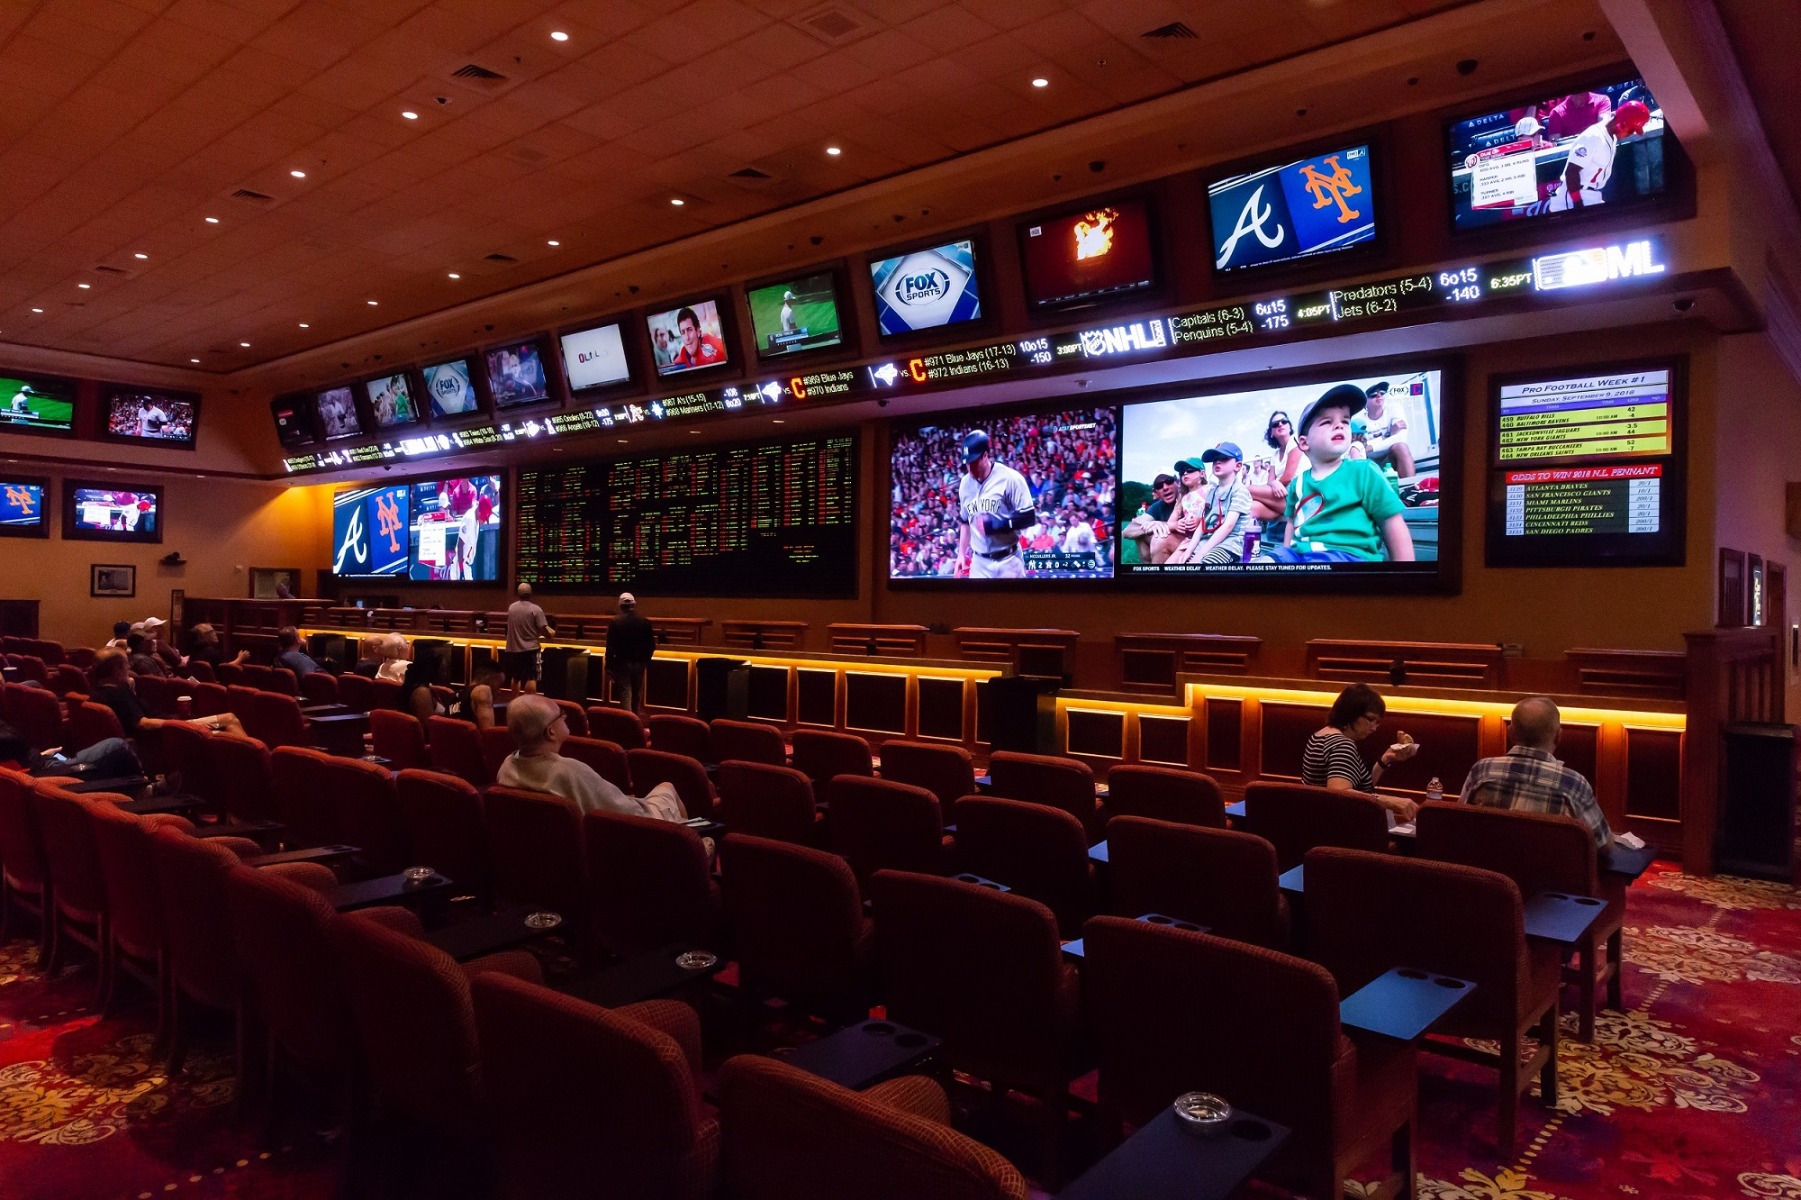 Elation EVHD™ LED Video Panels for South Point Hotel and CasinoGallery Image south point casino 2018 sports book 